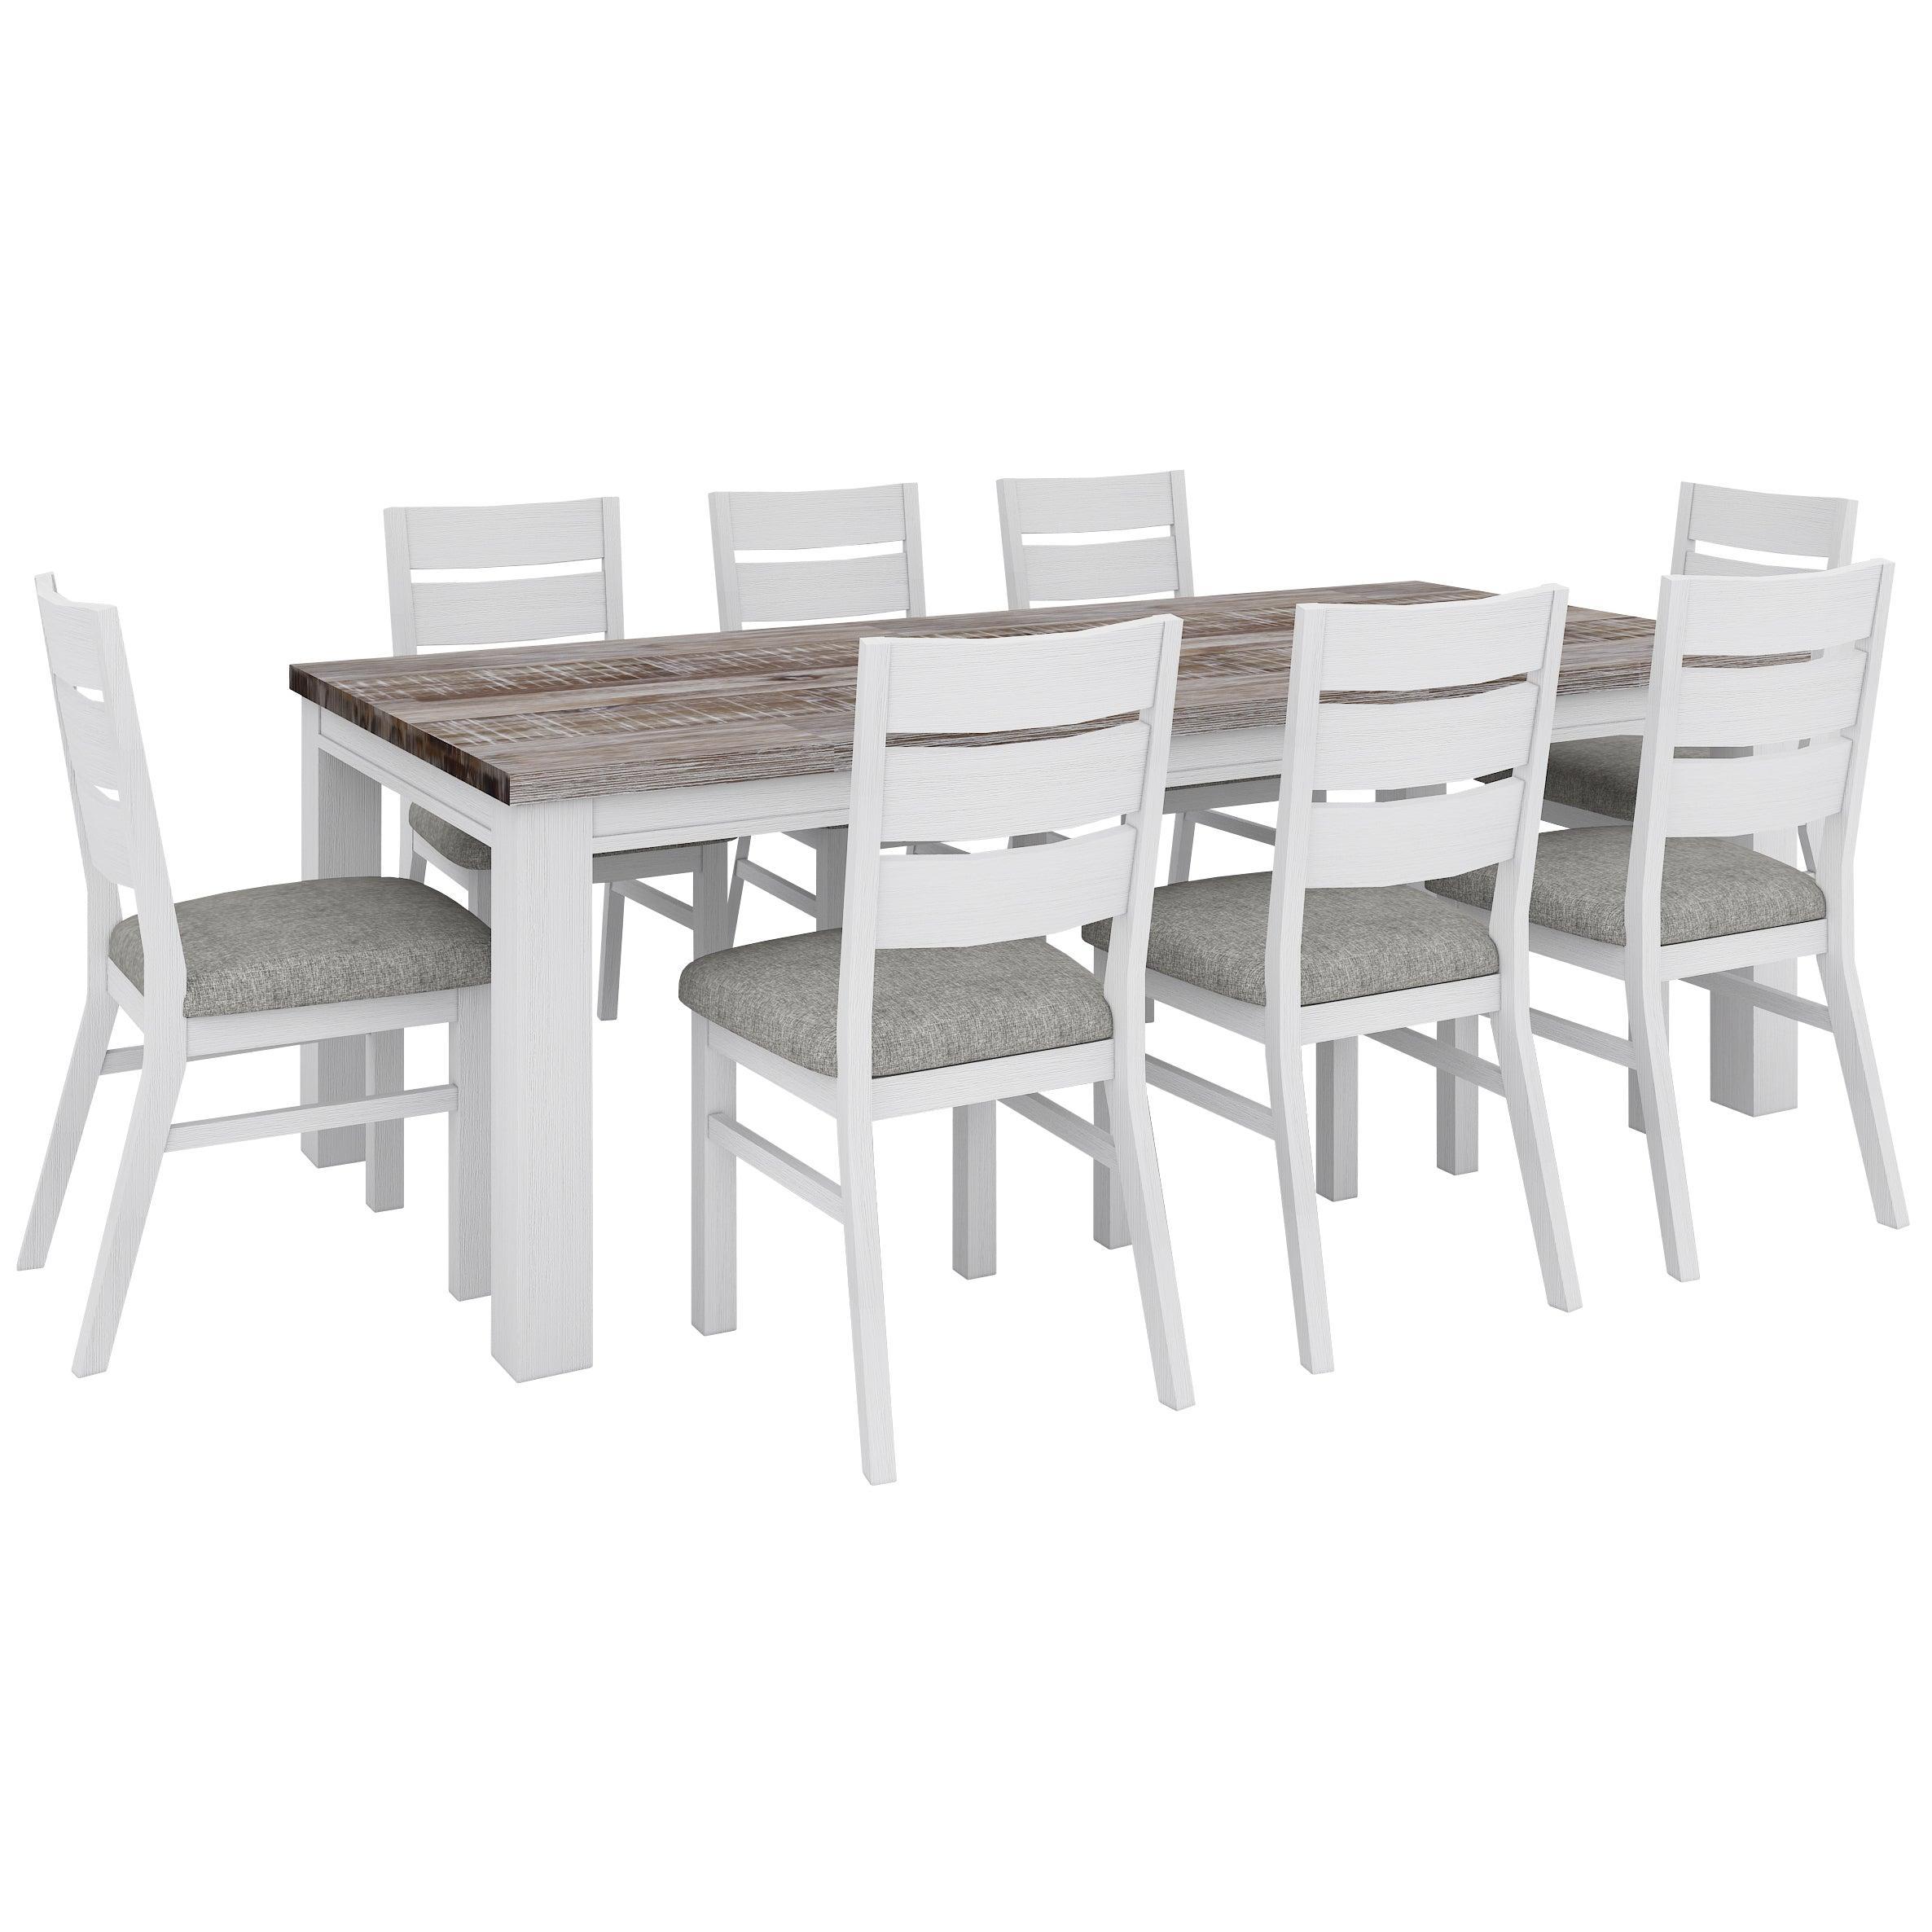 Plumeria 9Pc Dining Set 225Cm Table 8 Chair Solid Acacia Wood - White Brush